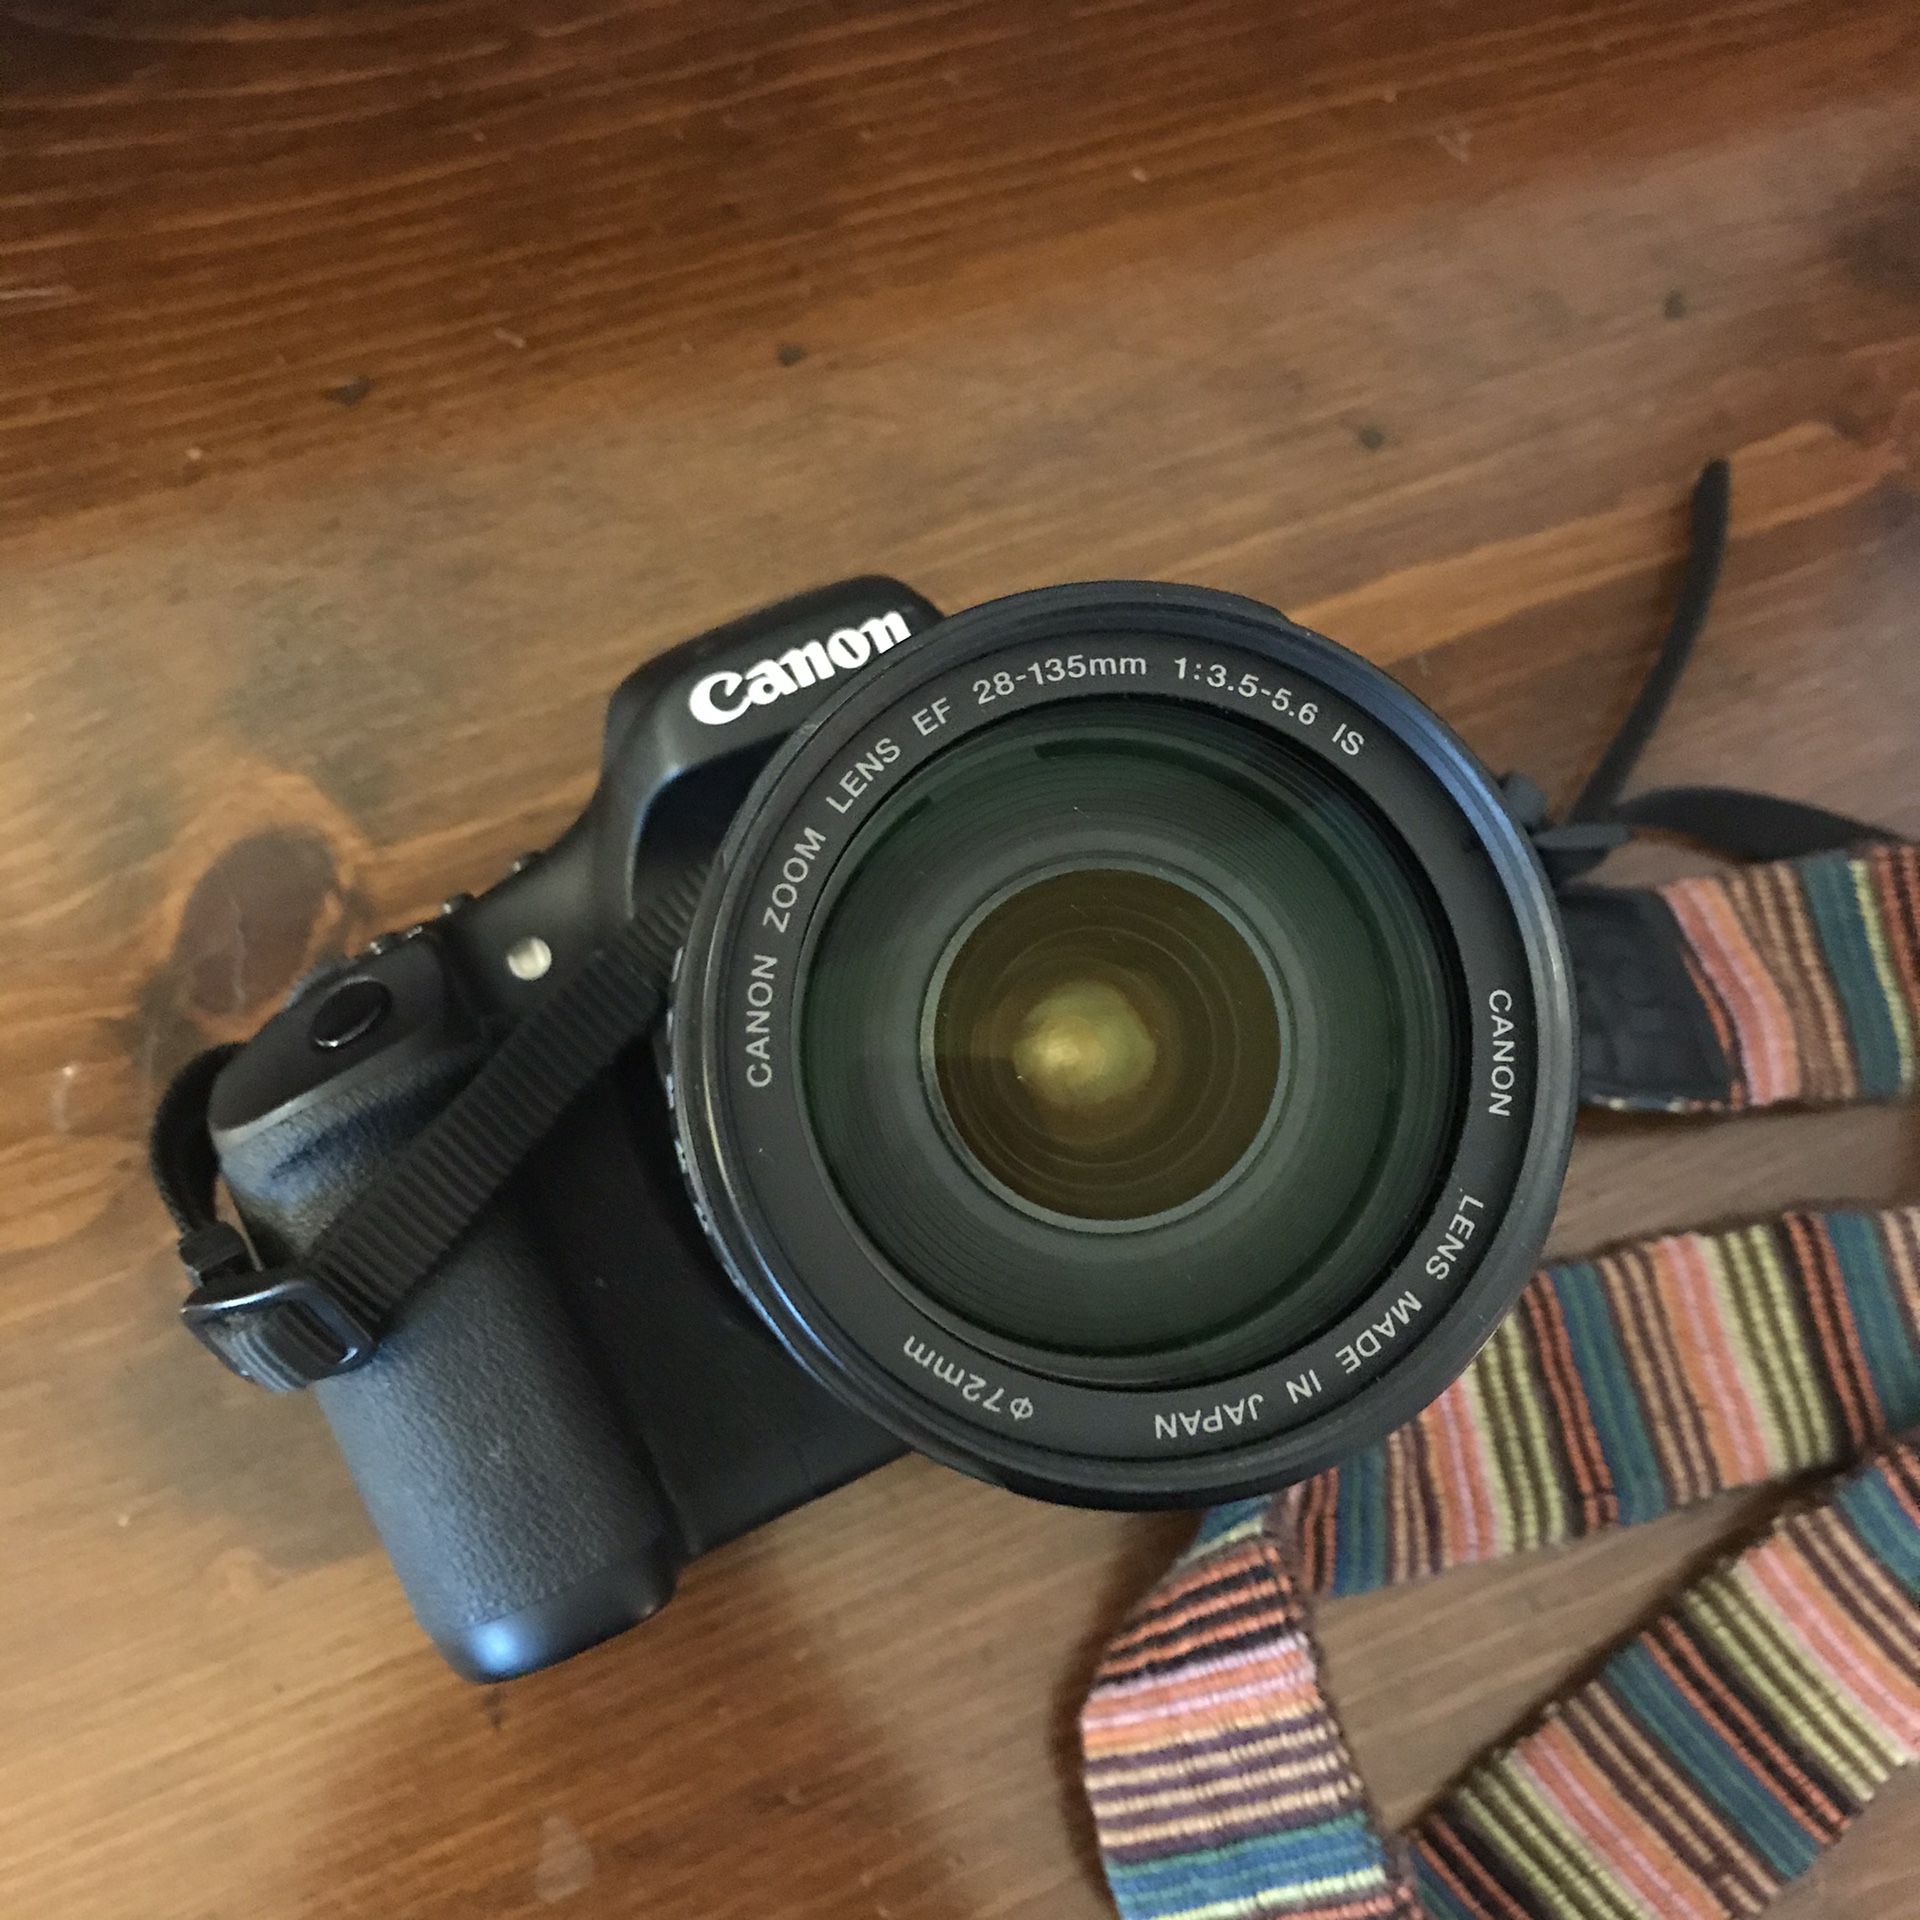 Canon 7D with 28-135mm lens and batteries